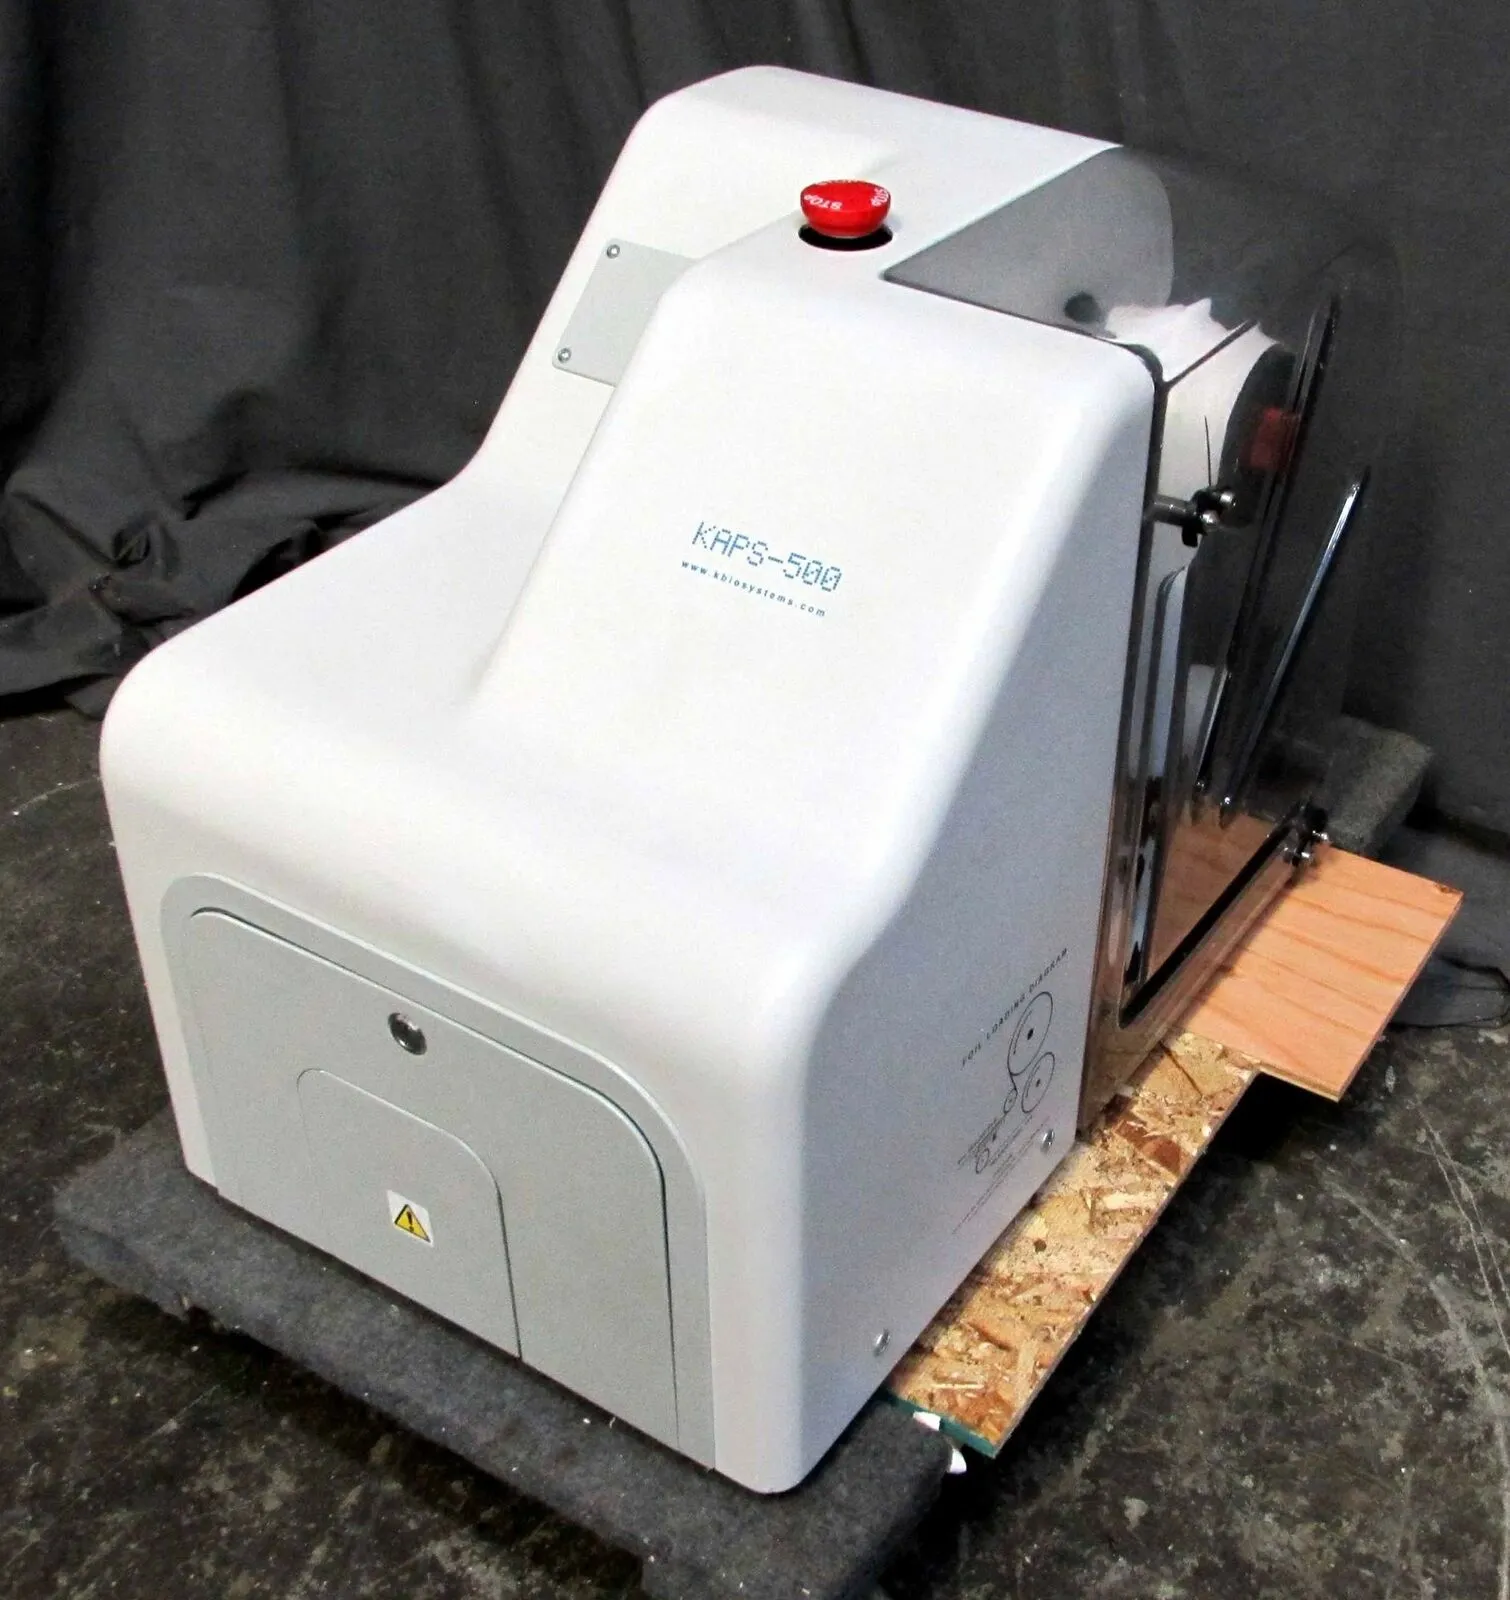 KBioSystems KAPS-500 Automatic Microplate Plate Heat Adhesive Pneumatic Sealer